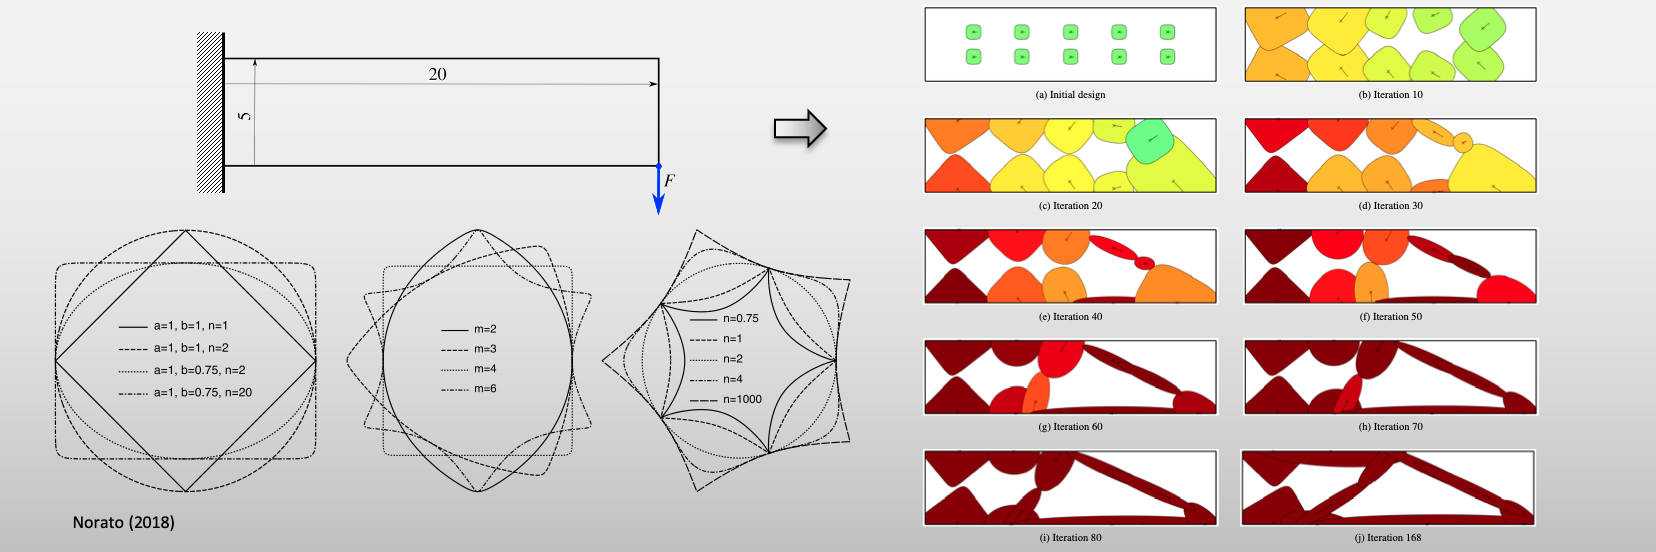 This slide shows an example of topology optimization of structures made of super shapes